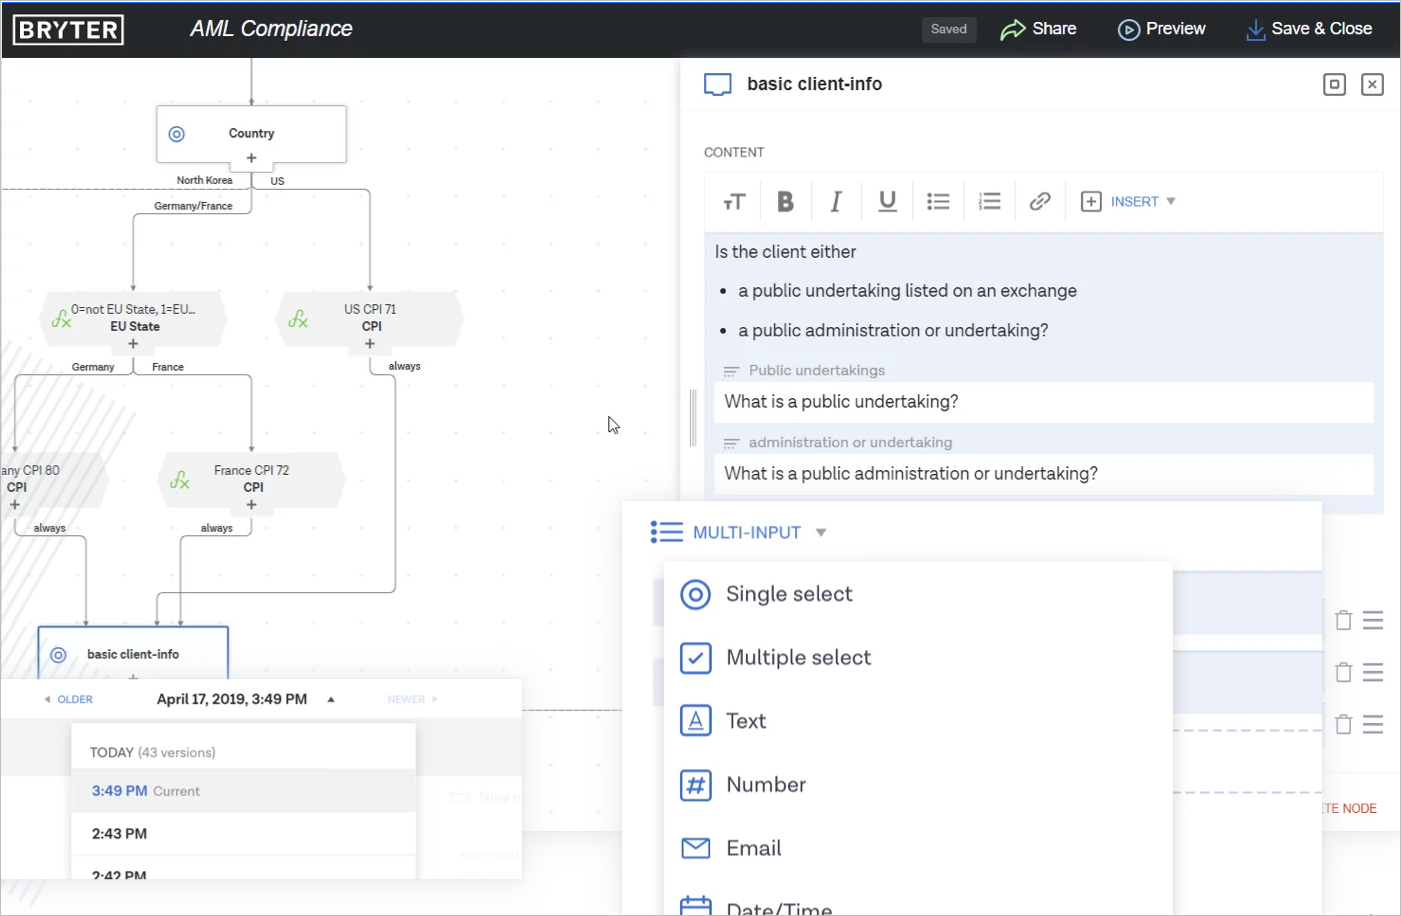 Screenshot of user building a compliance workflow in BRYTER